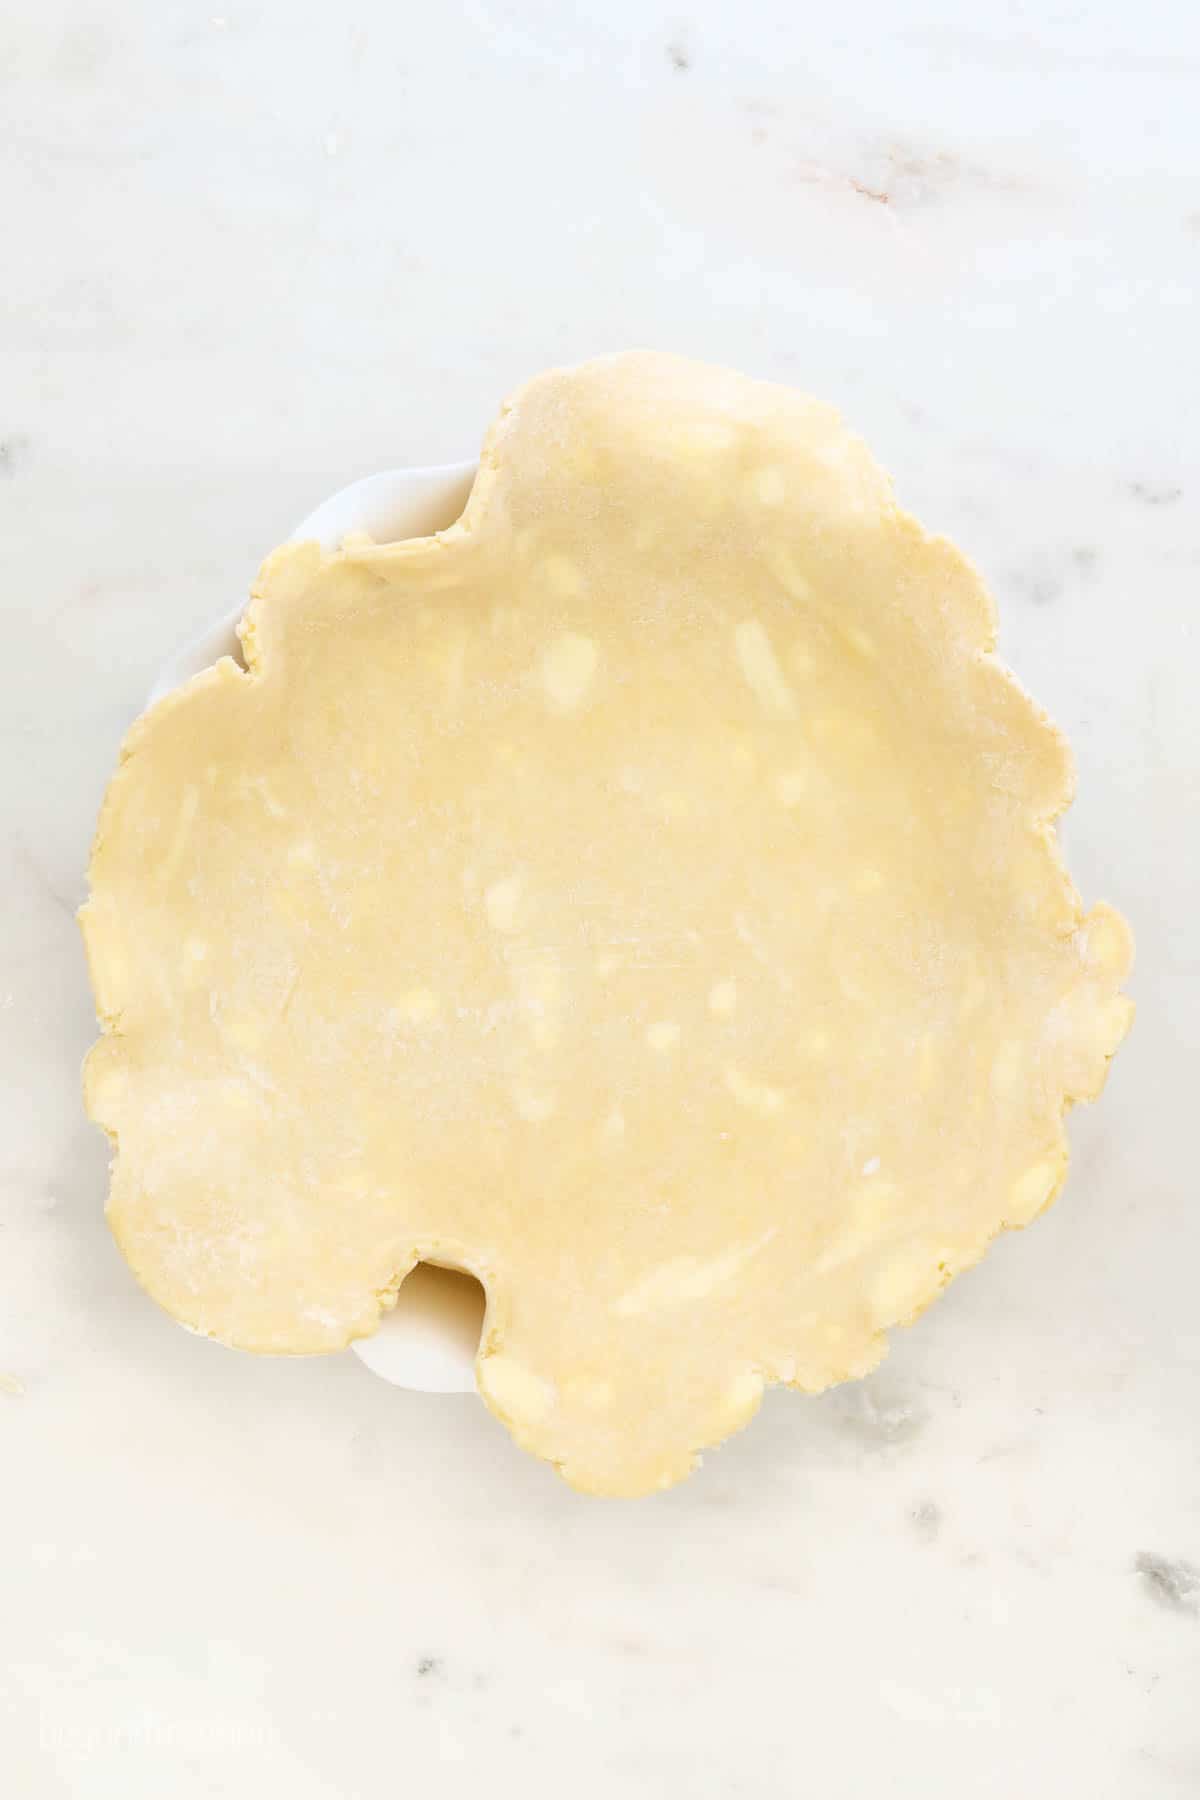 An 11-inch slab of pie crust dough draped over a white pie plate